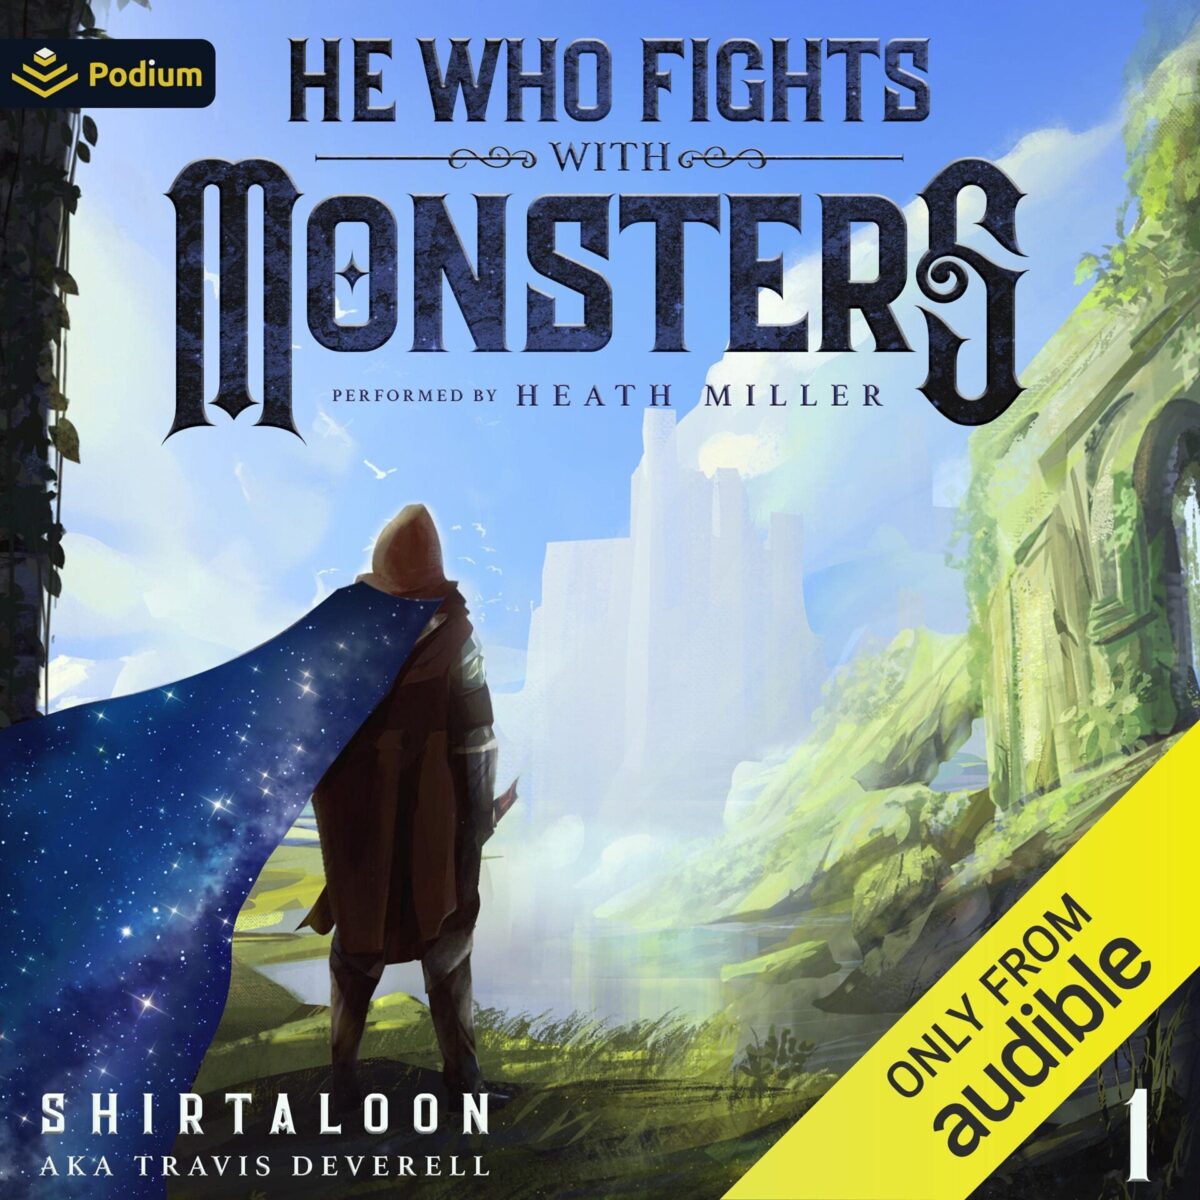 https://theaudiobookreview.com/wp-content/uploads/2023/05/1-He-Who-Fights-with-Monsters%EA%9E%89-A-LitRPG-Adventure%EA%9E%89-He-Who-Fights-with-Monsters-Book-1.jpg